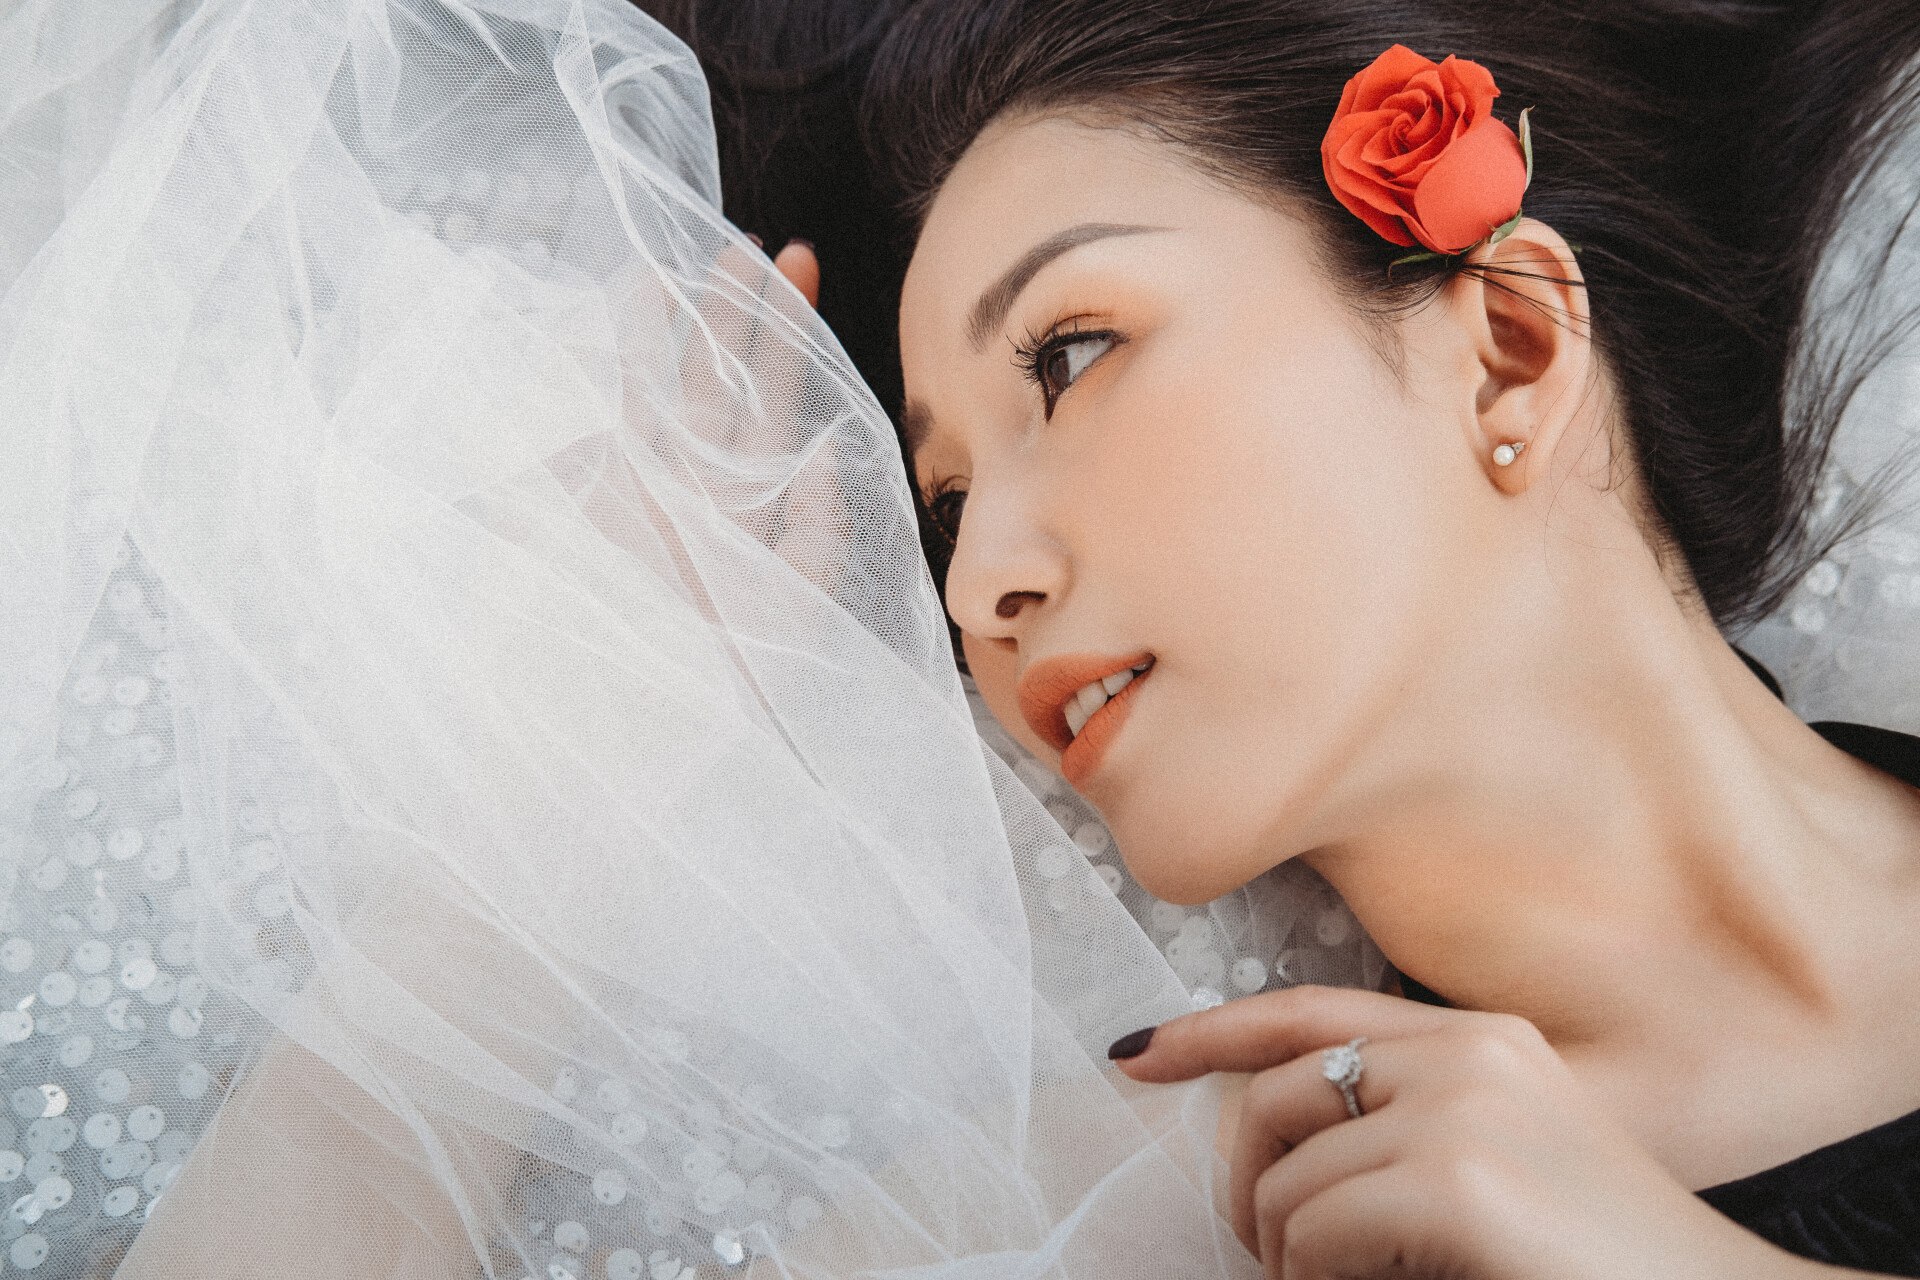 Asian Mail Order Brides A Secure Way to Meet Your Dream Wedding Bride